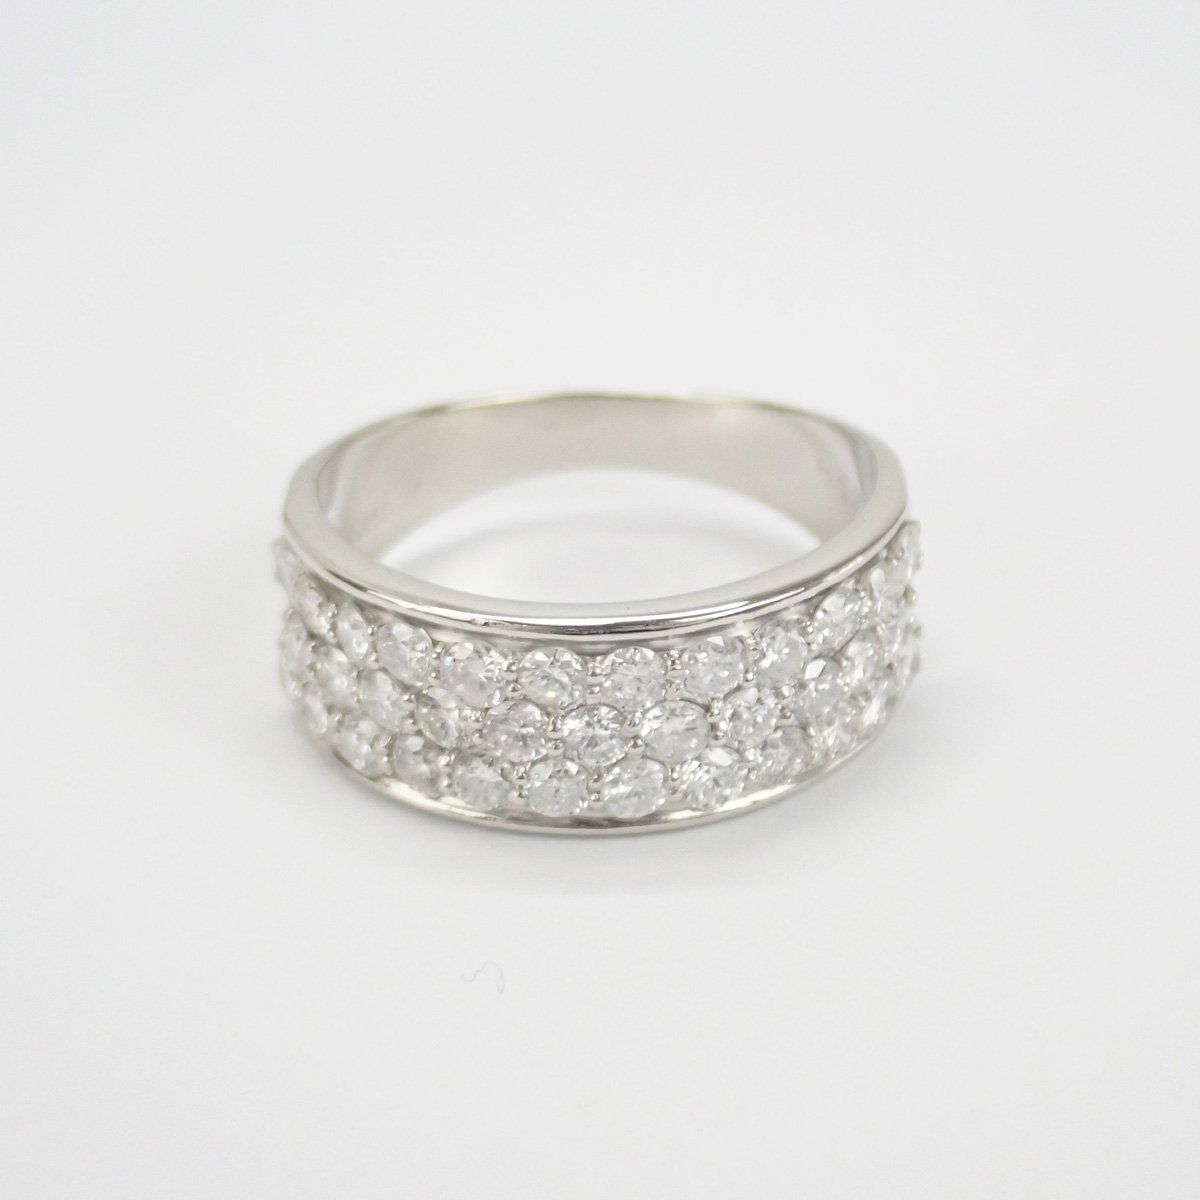 Pt850 Platinum Designer Ring with 1.43ct Diamond, Size ~15, Silver, Pre-Owned Women's Jewelry